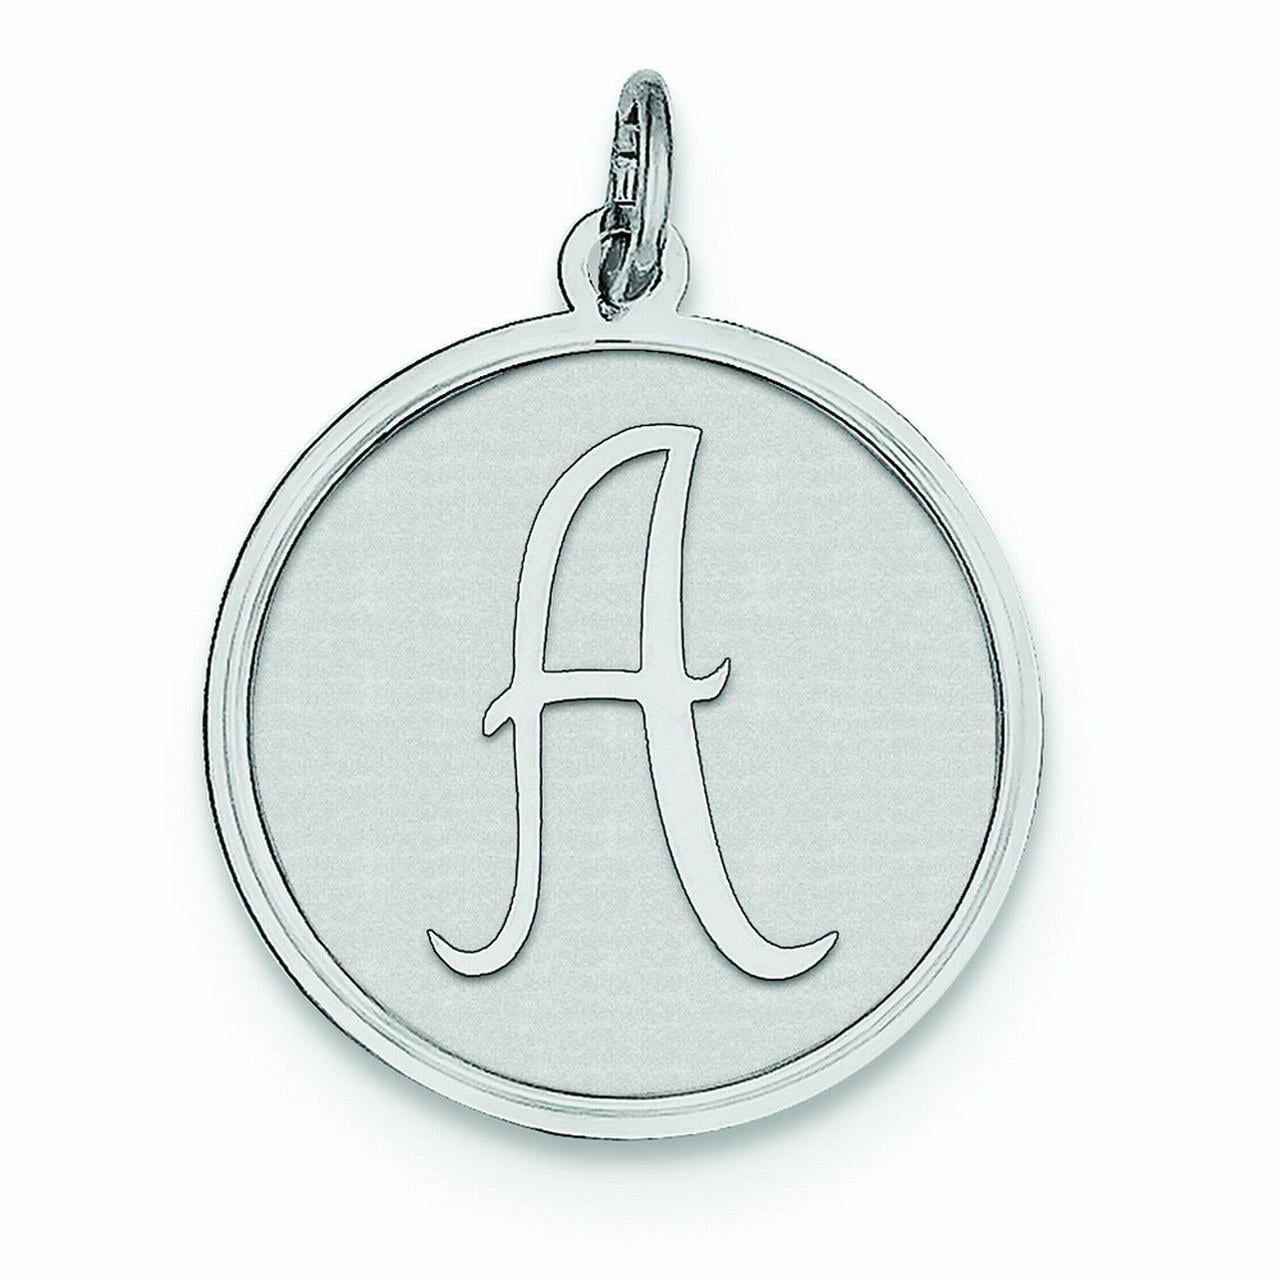 Bookshelf: Initial Kit for Alphabet Charms in Sterling Silver .925